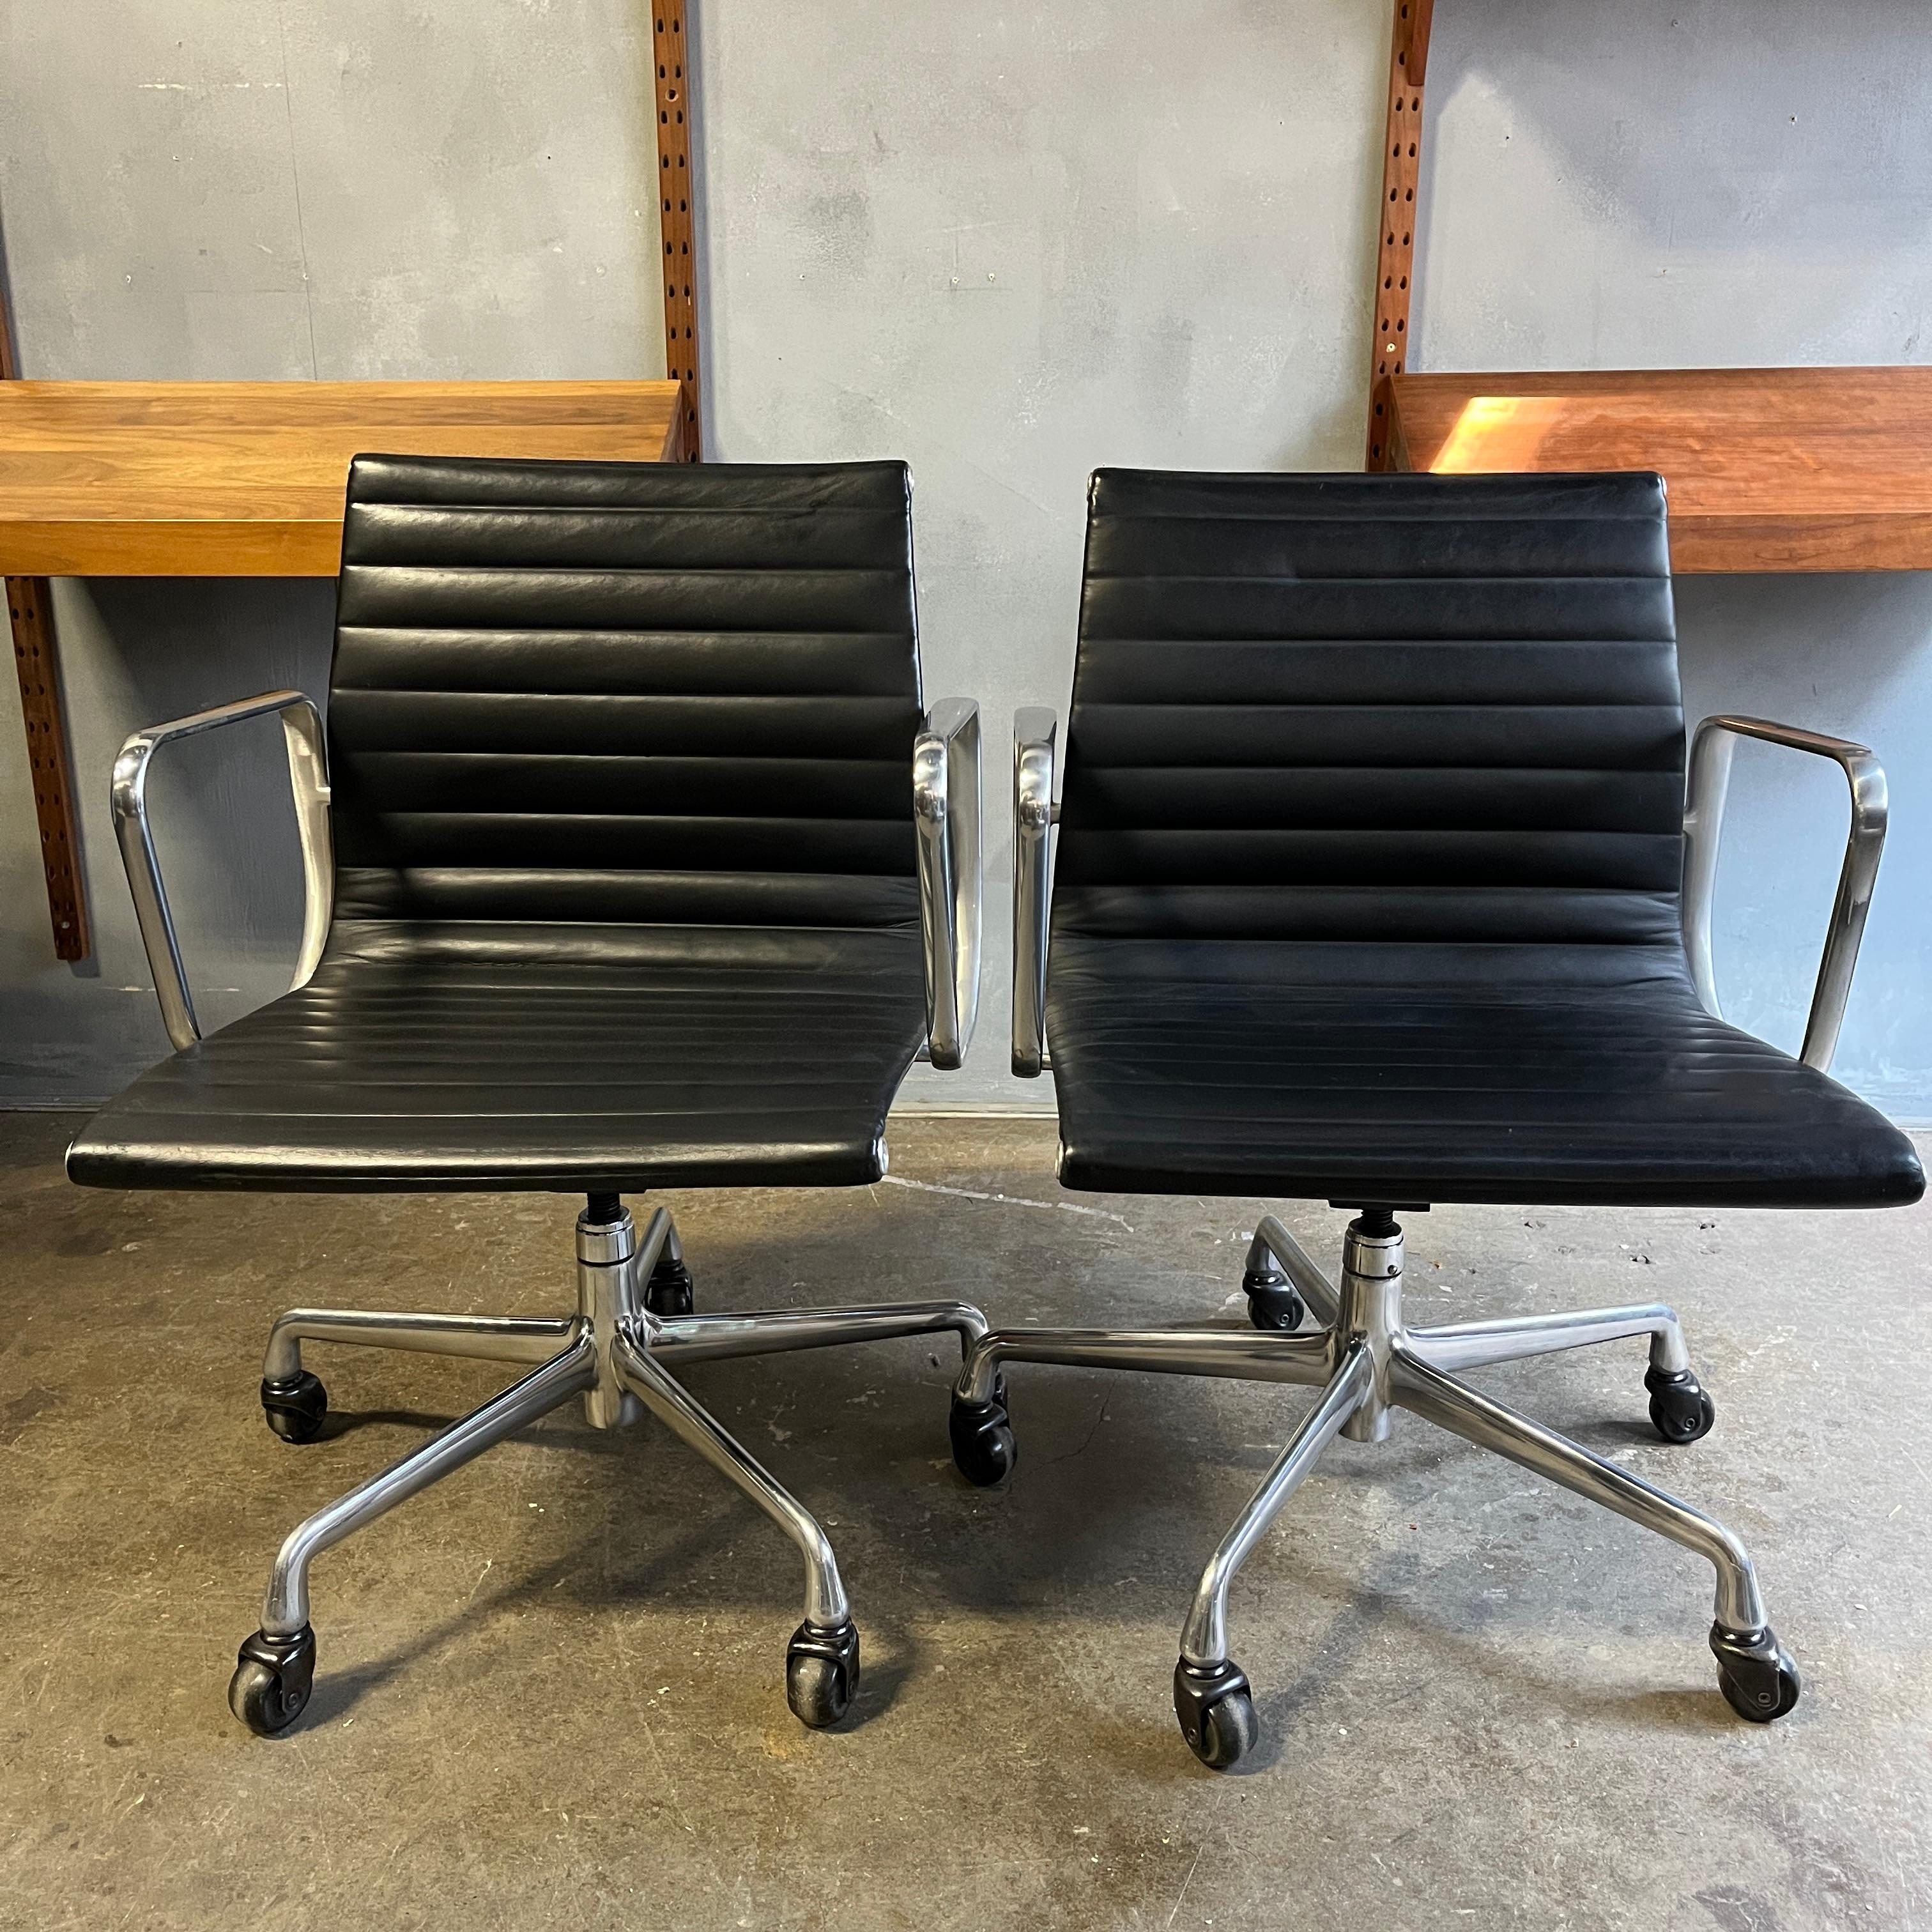 For your consideration are up to 2 aluminum group chairs in black leather designed by Eames for Herman Miller. All in very good original condition showing minimal wear. With manual tilt and height adjustment. wheels are for hard wood floor surfaces.